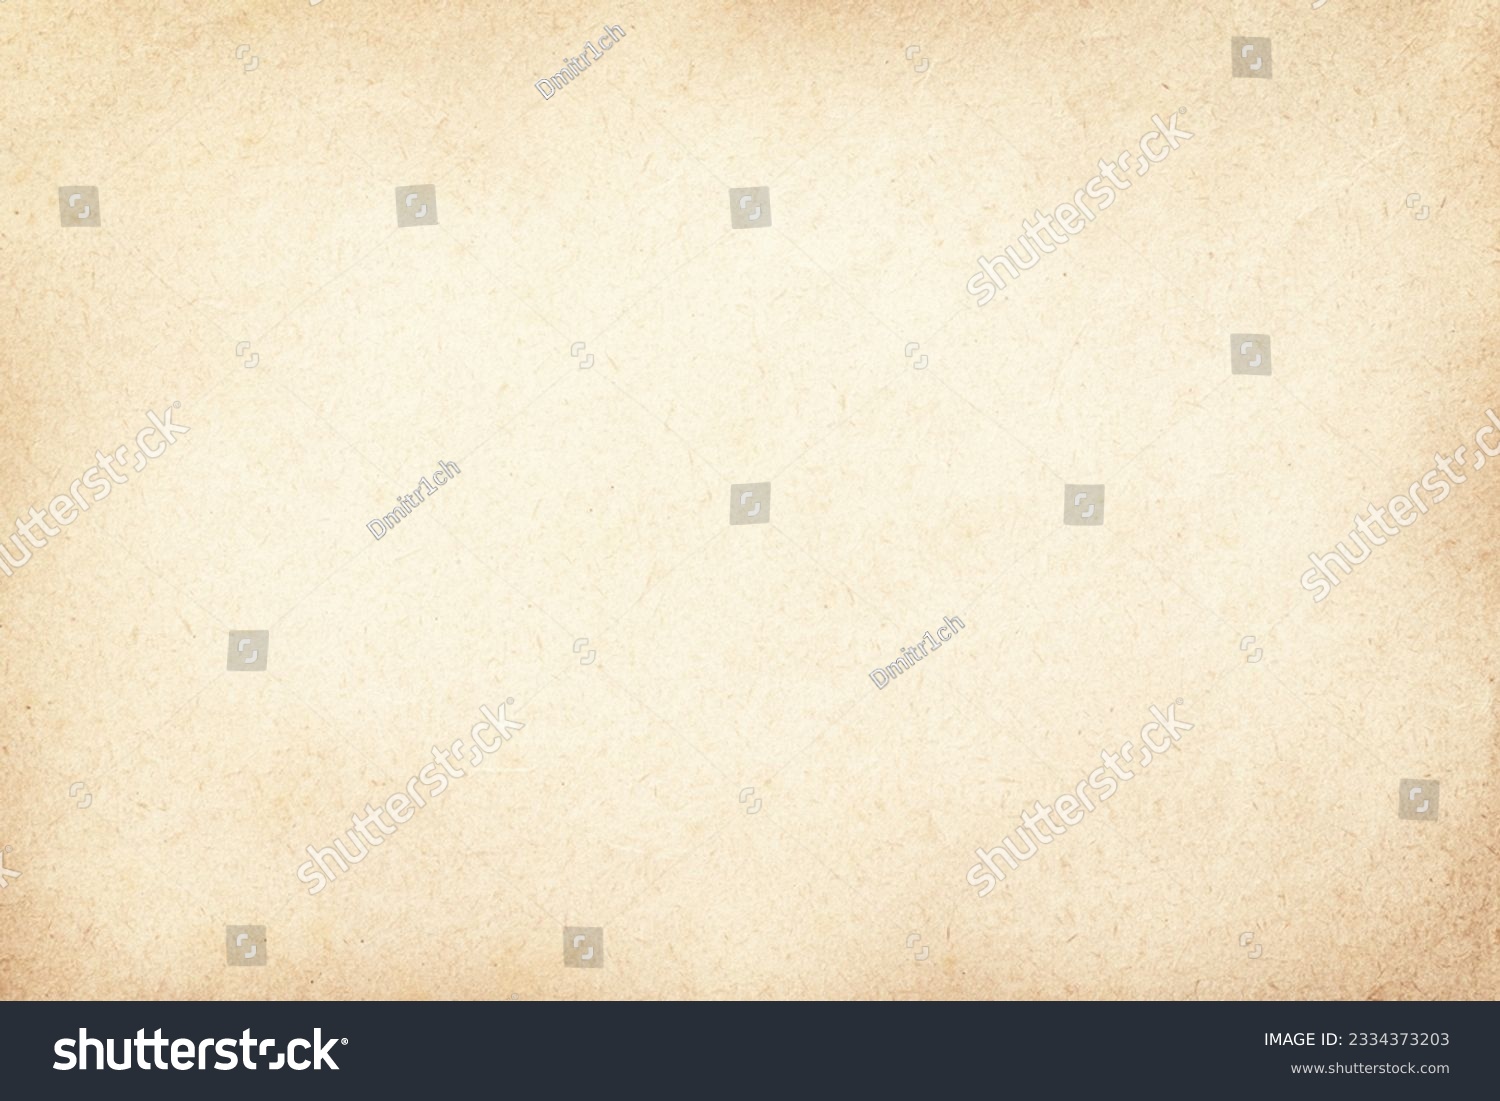 ancient parchment background, weathered paper texture for text #2334373203